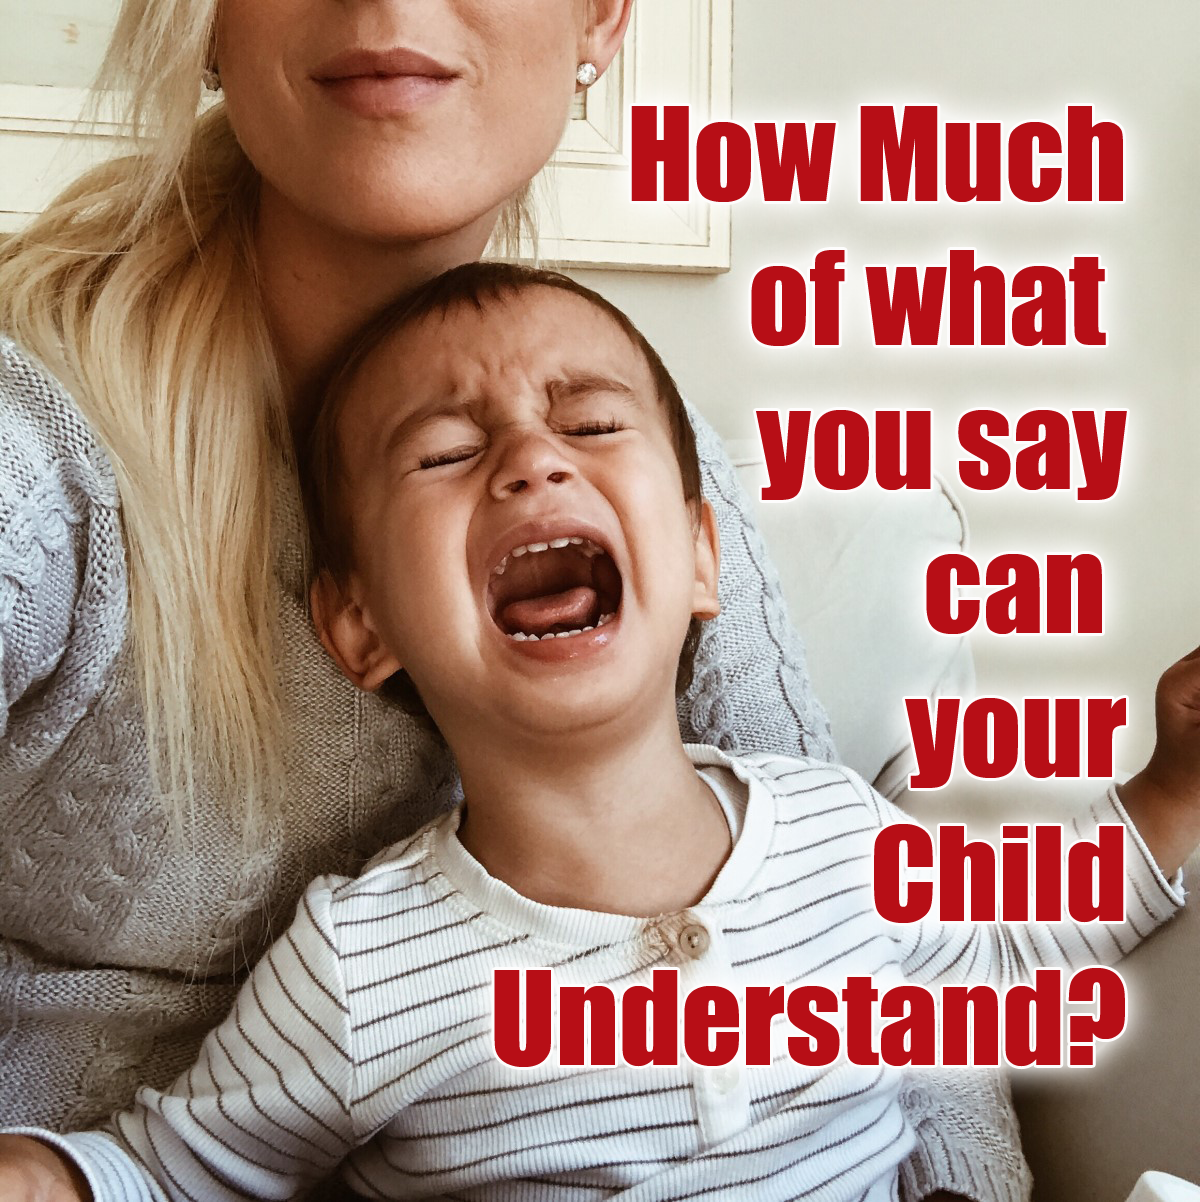 How much of what you say can your child understand?